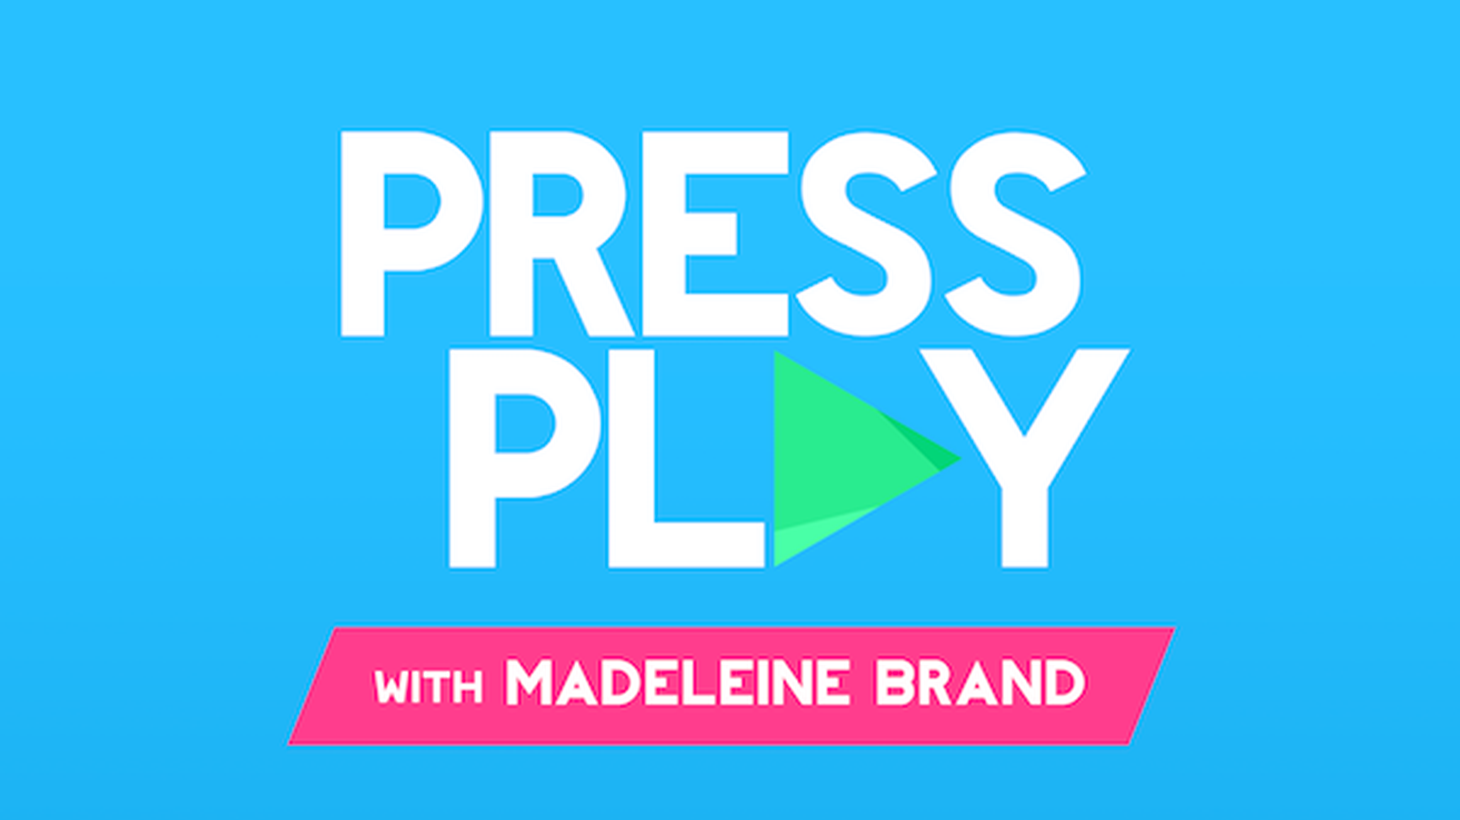 Today on Press Play: Emmy nominations, a preview of the World Cup final, the fight for water, and teens with family in prison.